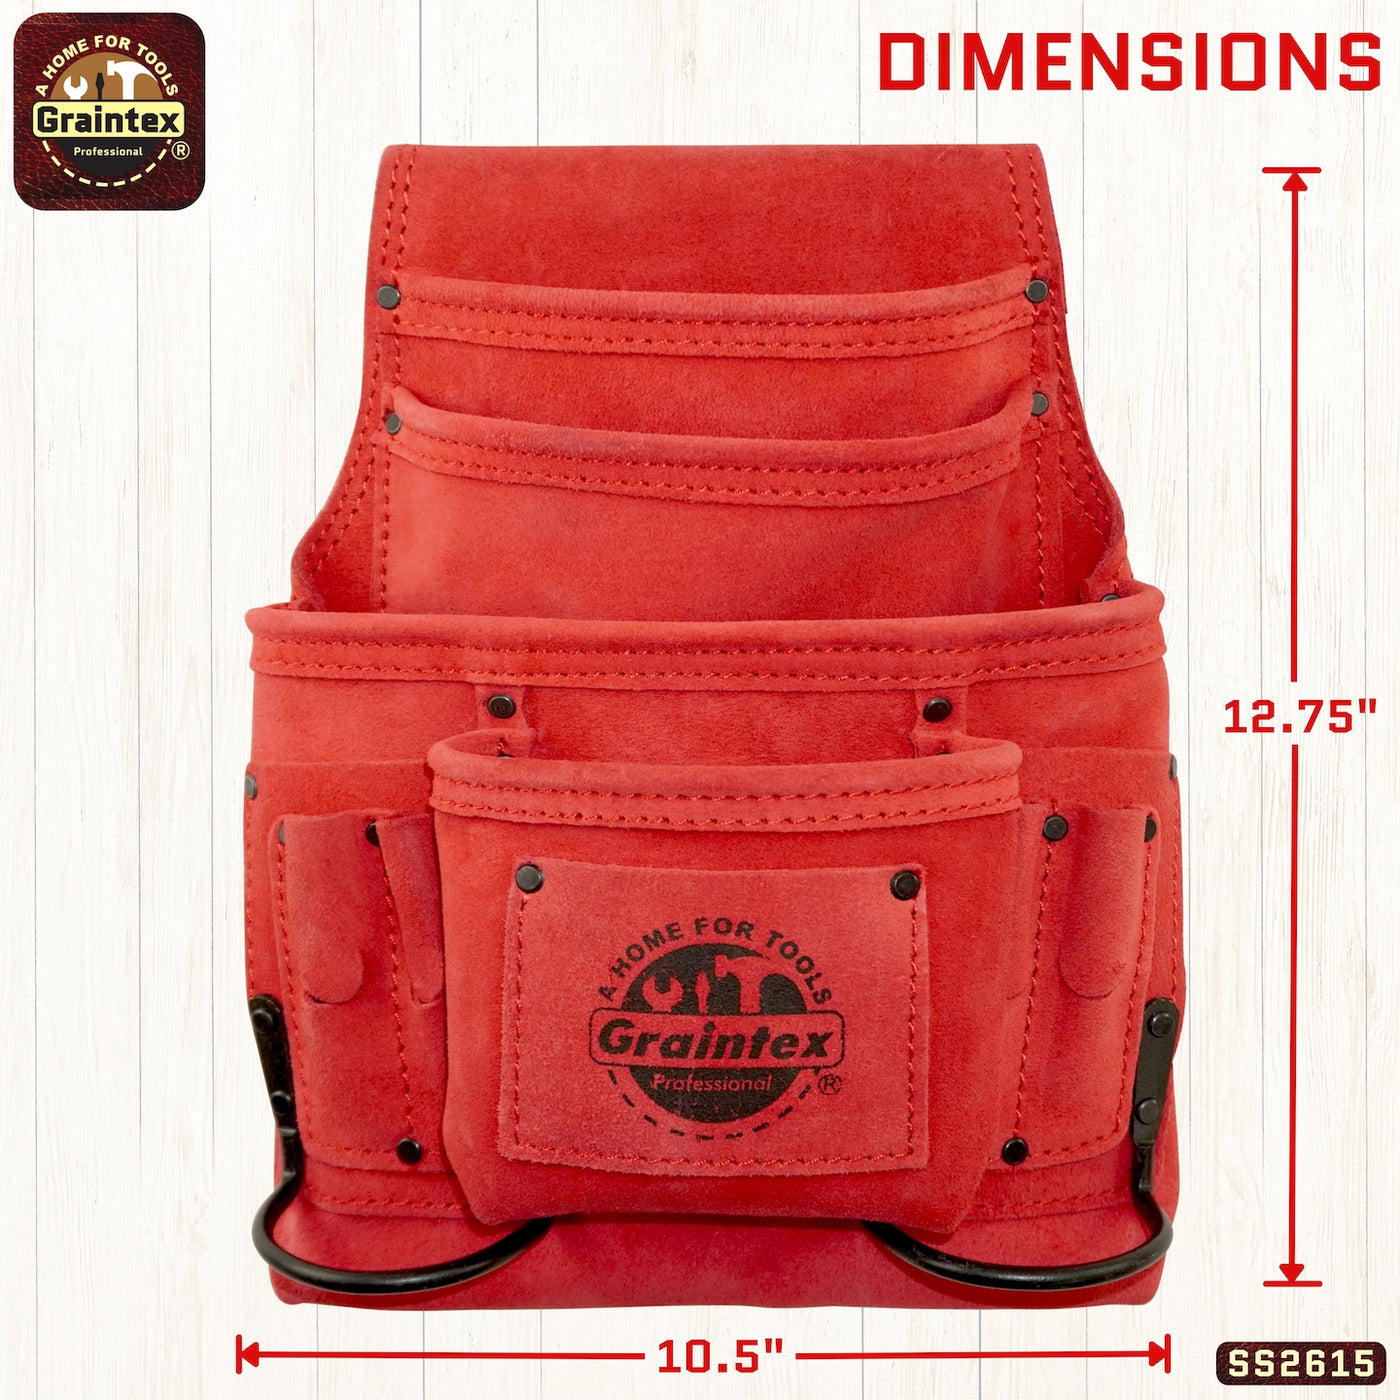 SS2615 :: 10 Pocket Nail & Tool Pouch Red Color Suede Leather